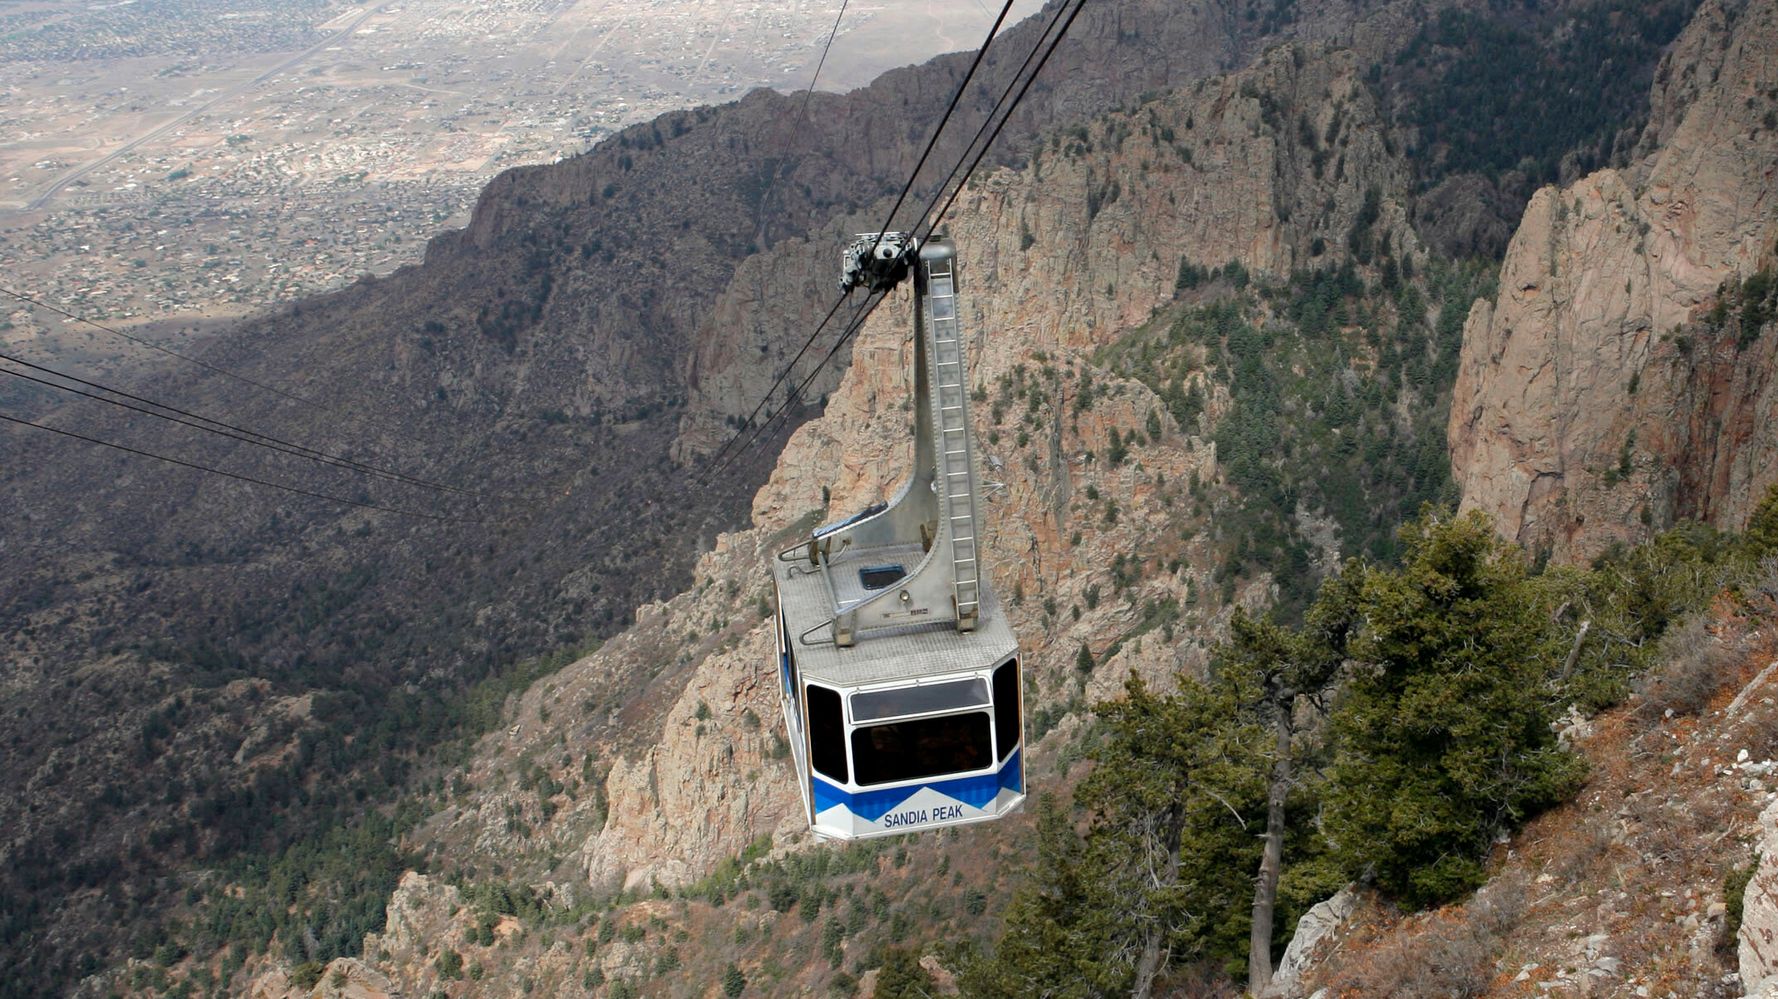 21 People Rescued After Being Stuck Overnight In Aerial Tram In